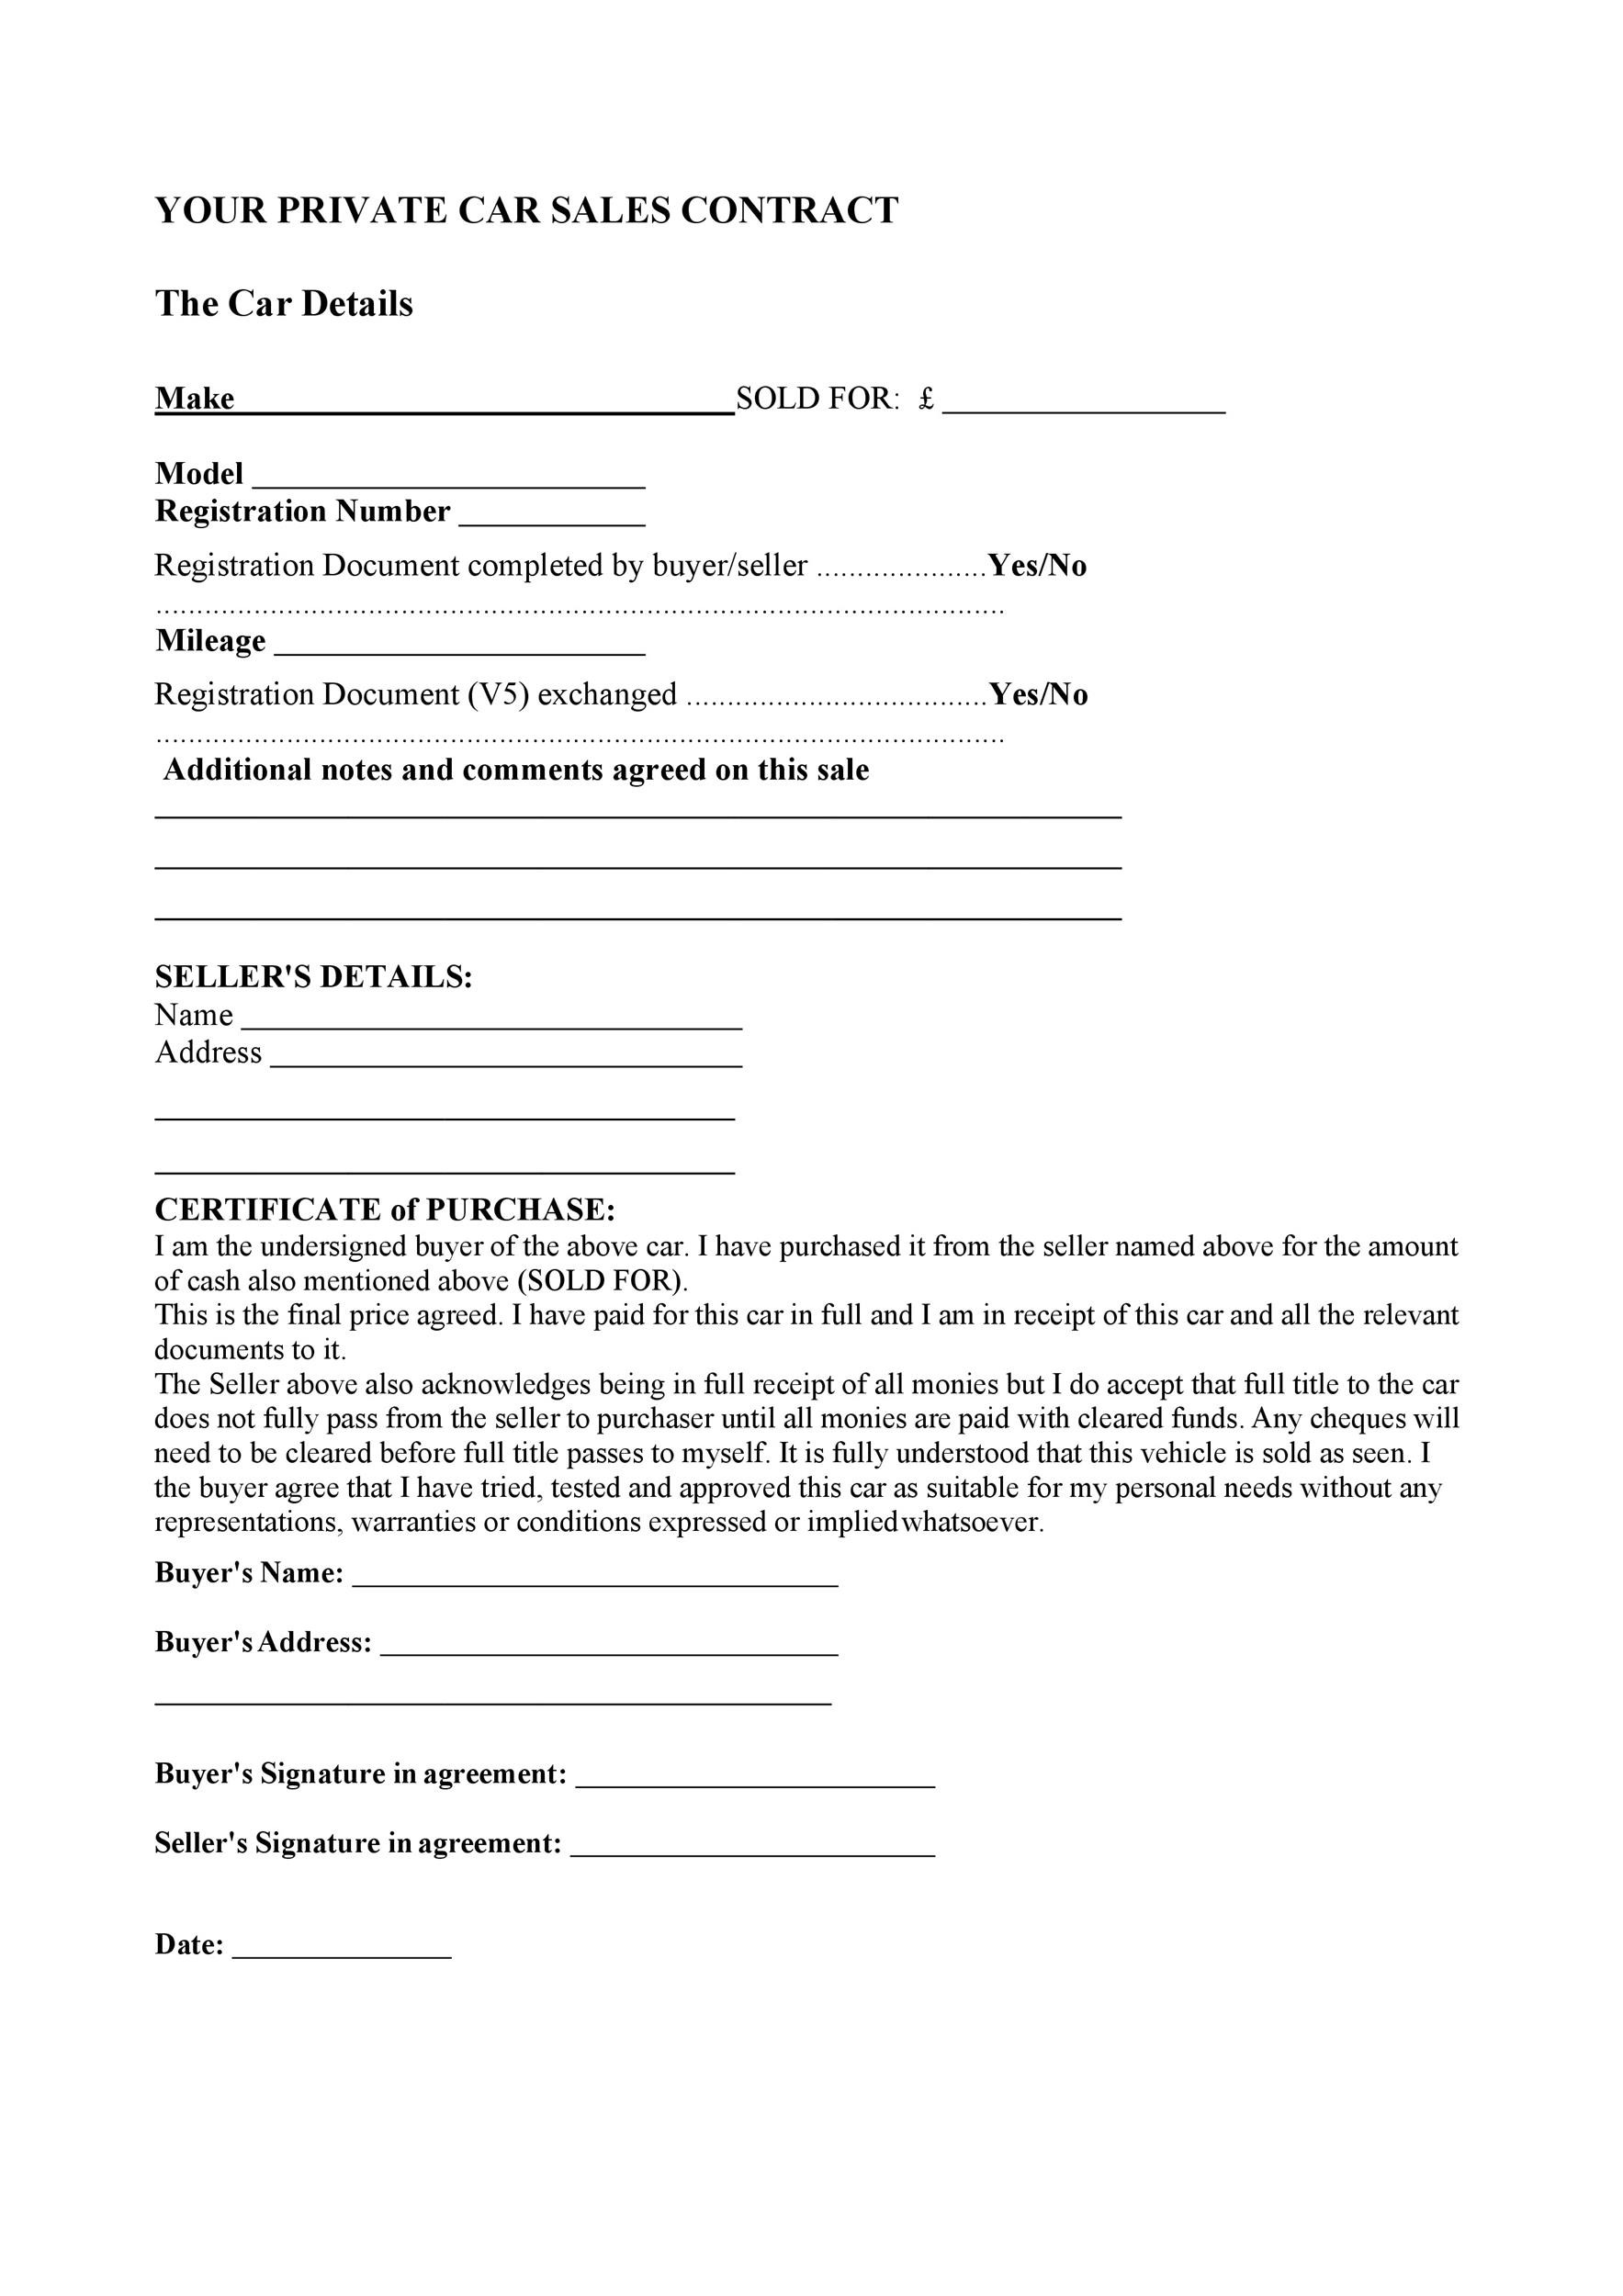 printable-vehicle-purchase-agreement-form-printable-forms-free-online